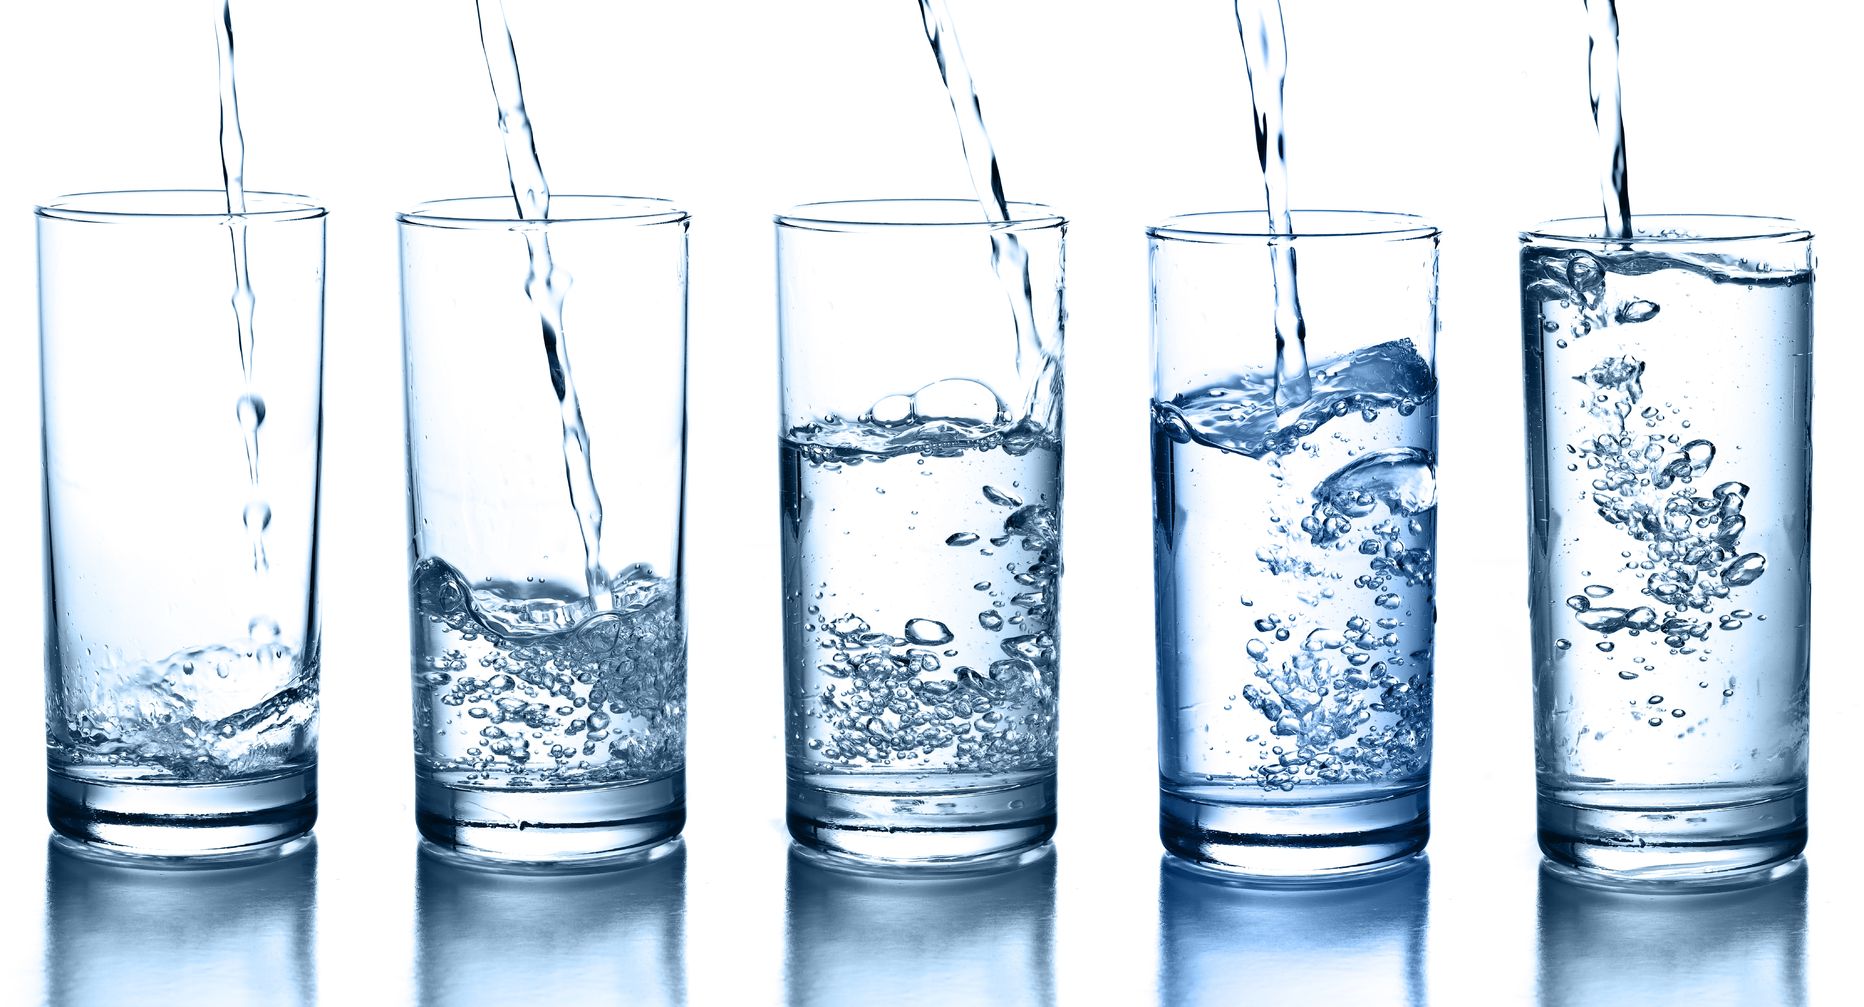 Make sure to drink the recommended amount of water to keep your body happy and healthy